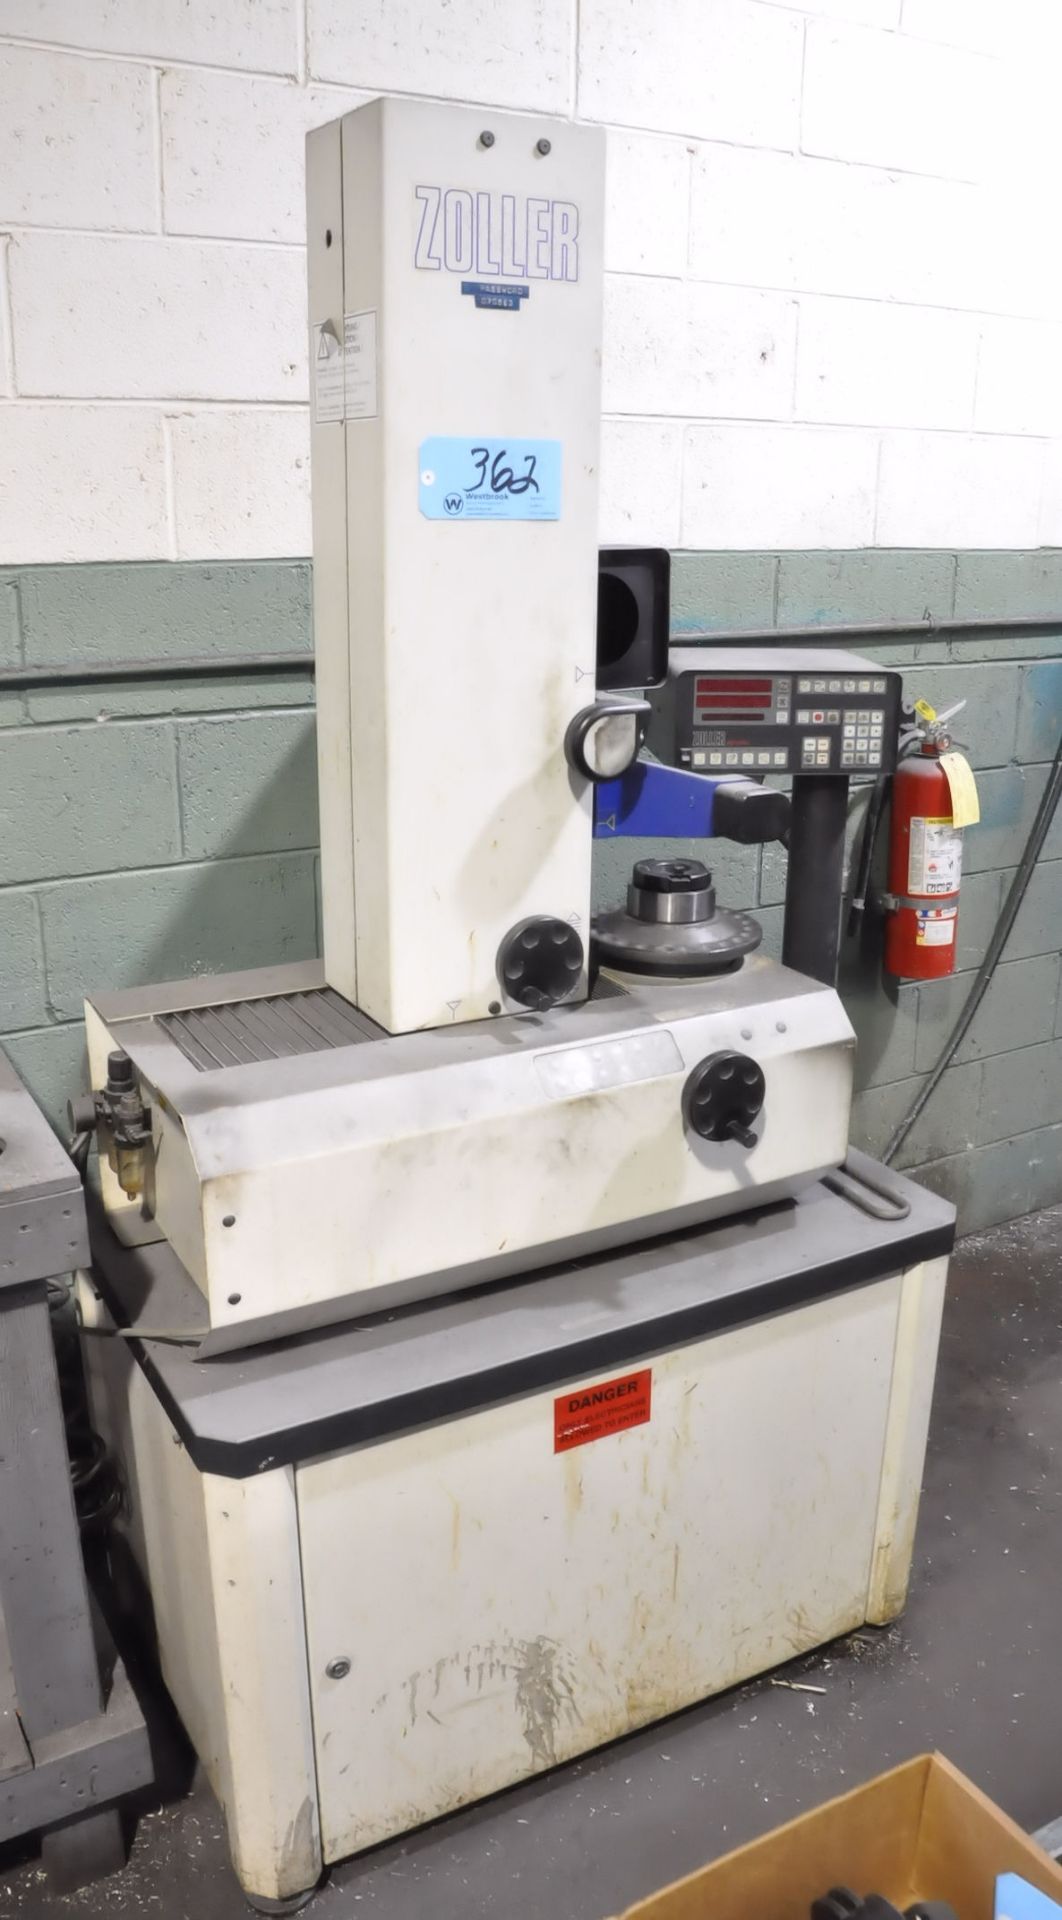 Zoller Type V420, Tool Presetter, S/n 0327, 2-Axis Digital Positioning Readout, Cabinet Base